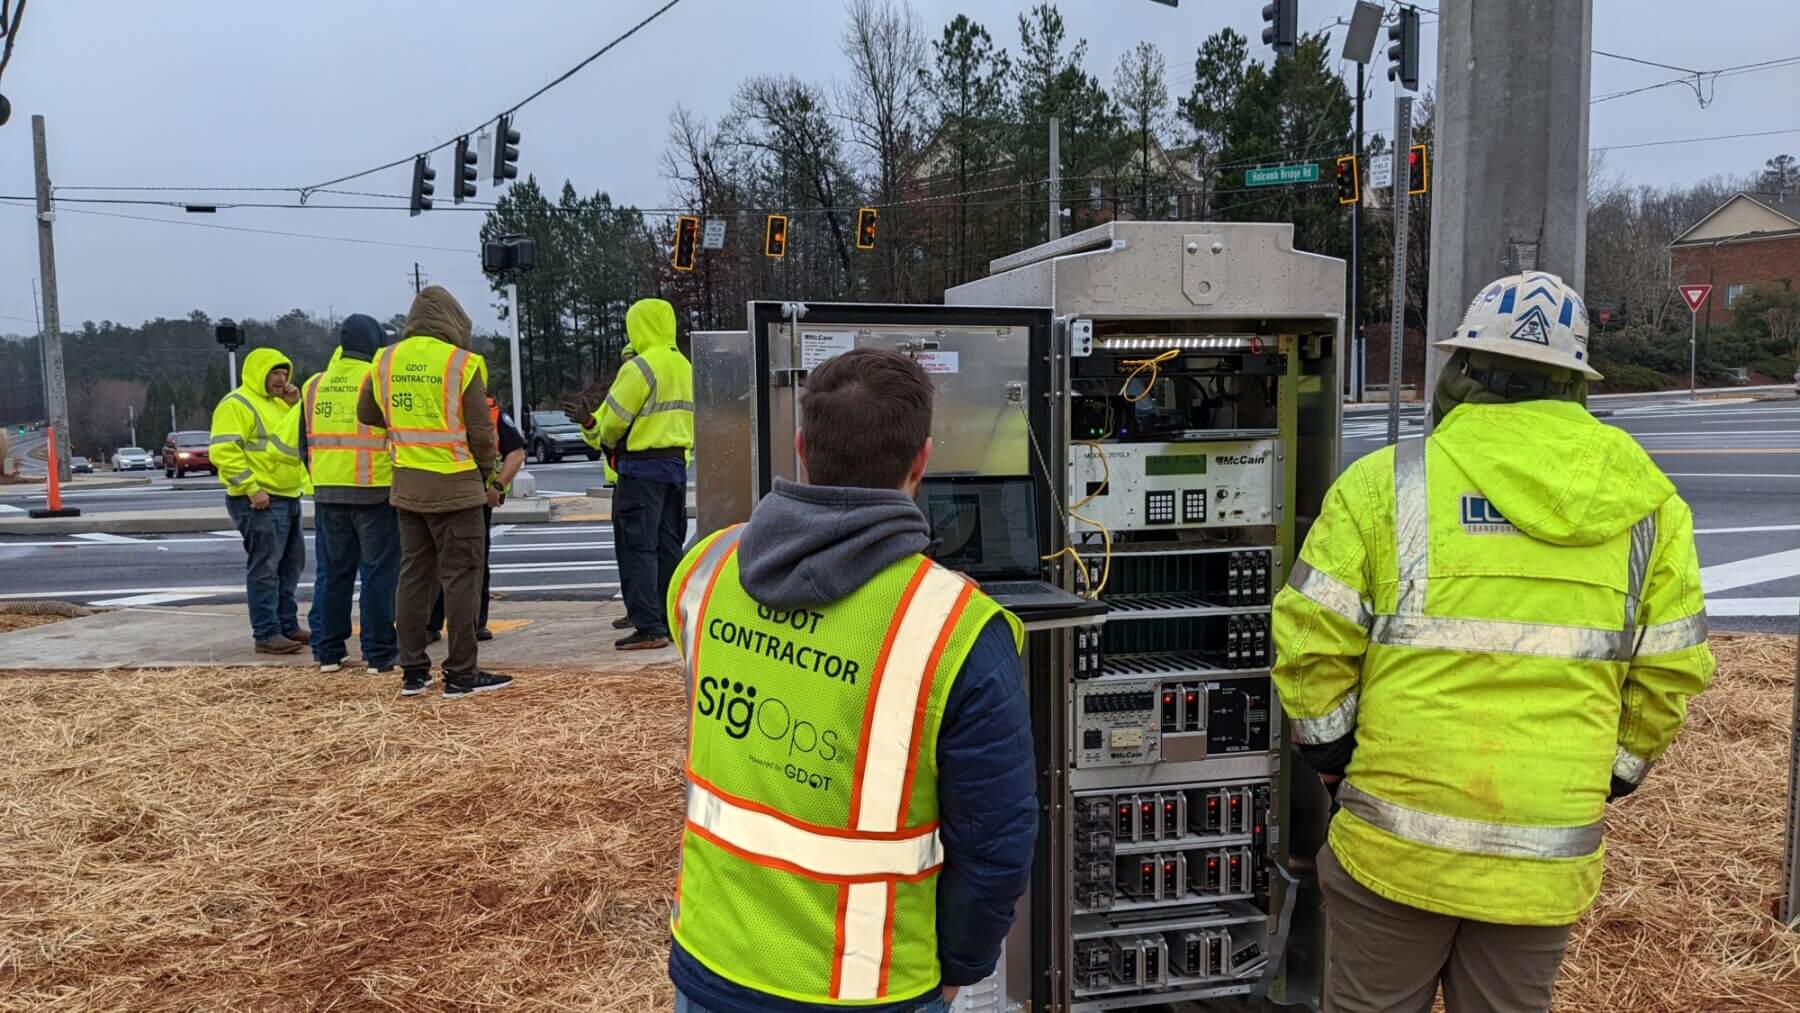 A group of people in yellow vests at a crosswalk for GDOT SigOps